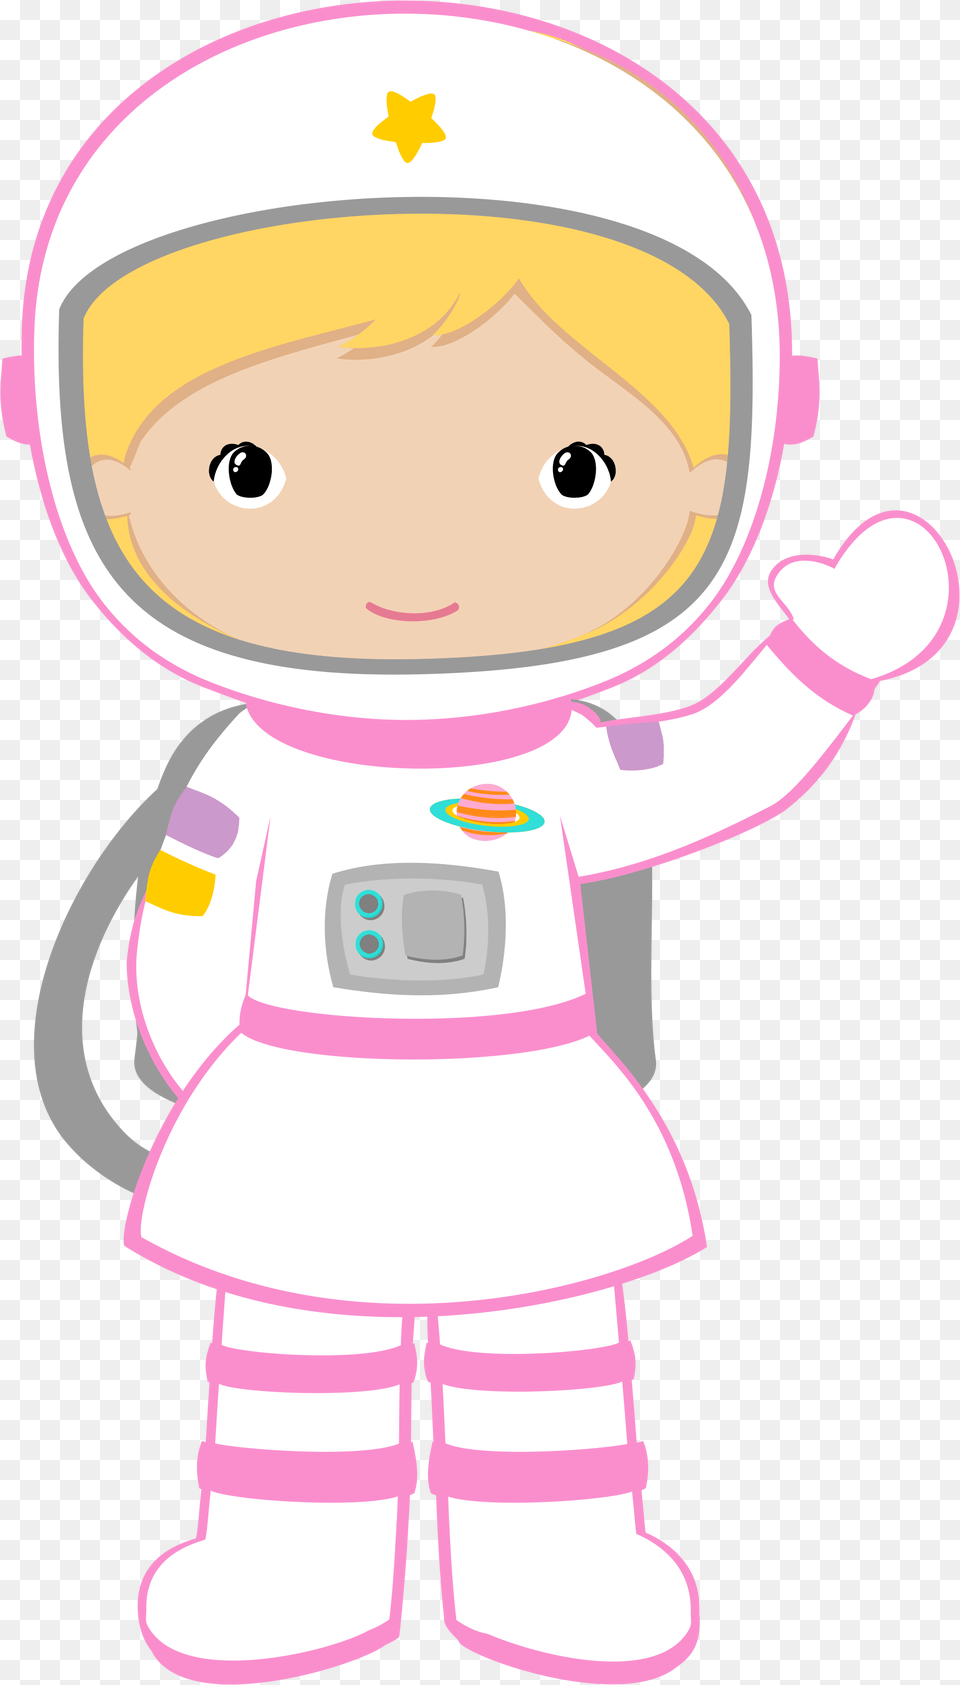 Nursery Wall Decals Monogrammed Wall Decals Pink Astronaut Clipart, Chair, Furniture, Face, Head Png Image